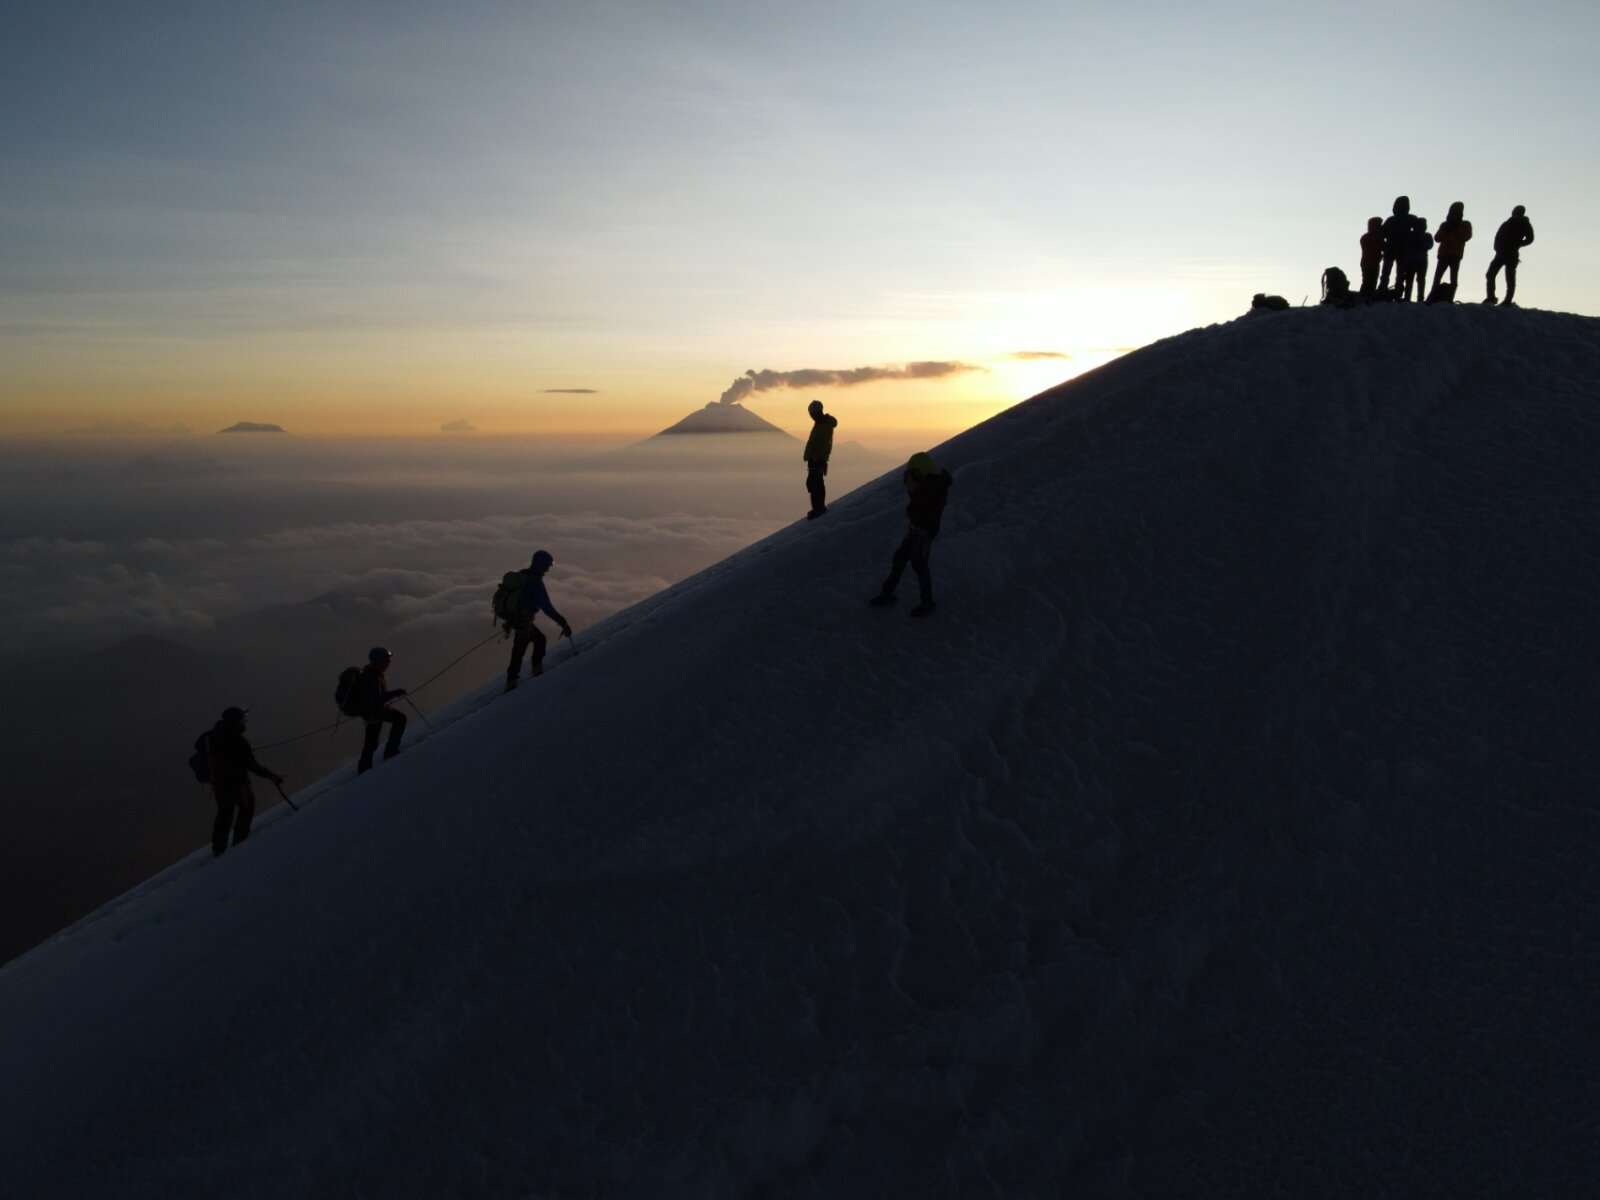 Professionally guided ski mountaineering trips to the volcanoes of Ecuador. Backcountry skiing in ecuador, ski ecuador, ski volcanoes, ecuador skiing, ski expedition, backcountry ski expedition, ecuador ski trip, guided ski trip, guided ski expedition, guided skiing in ecuador